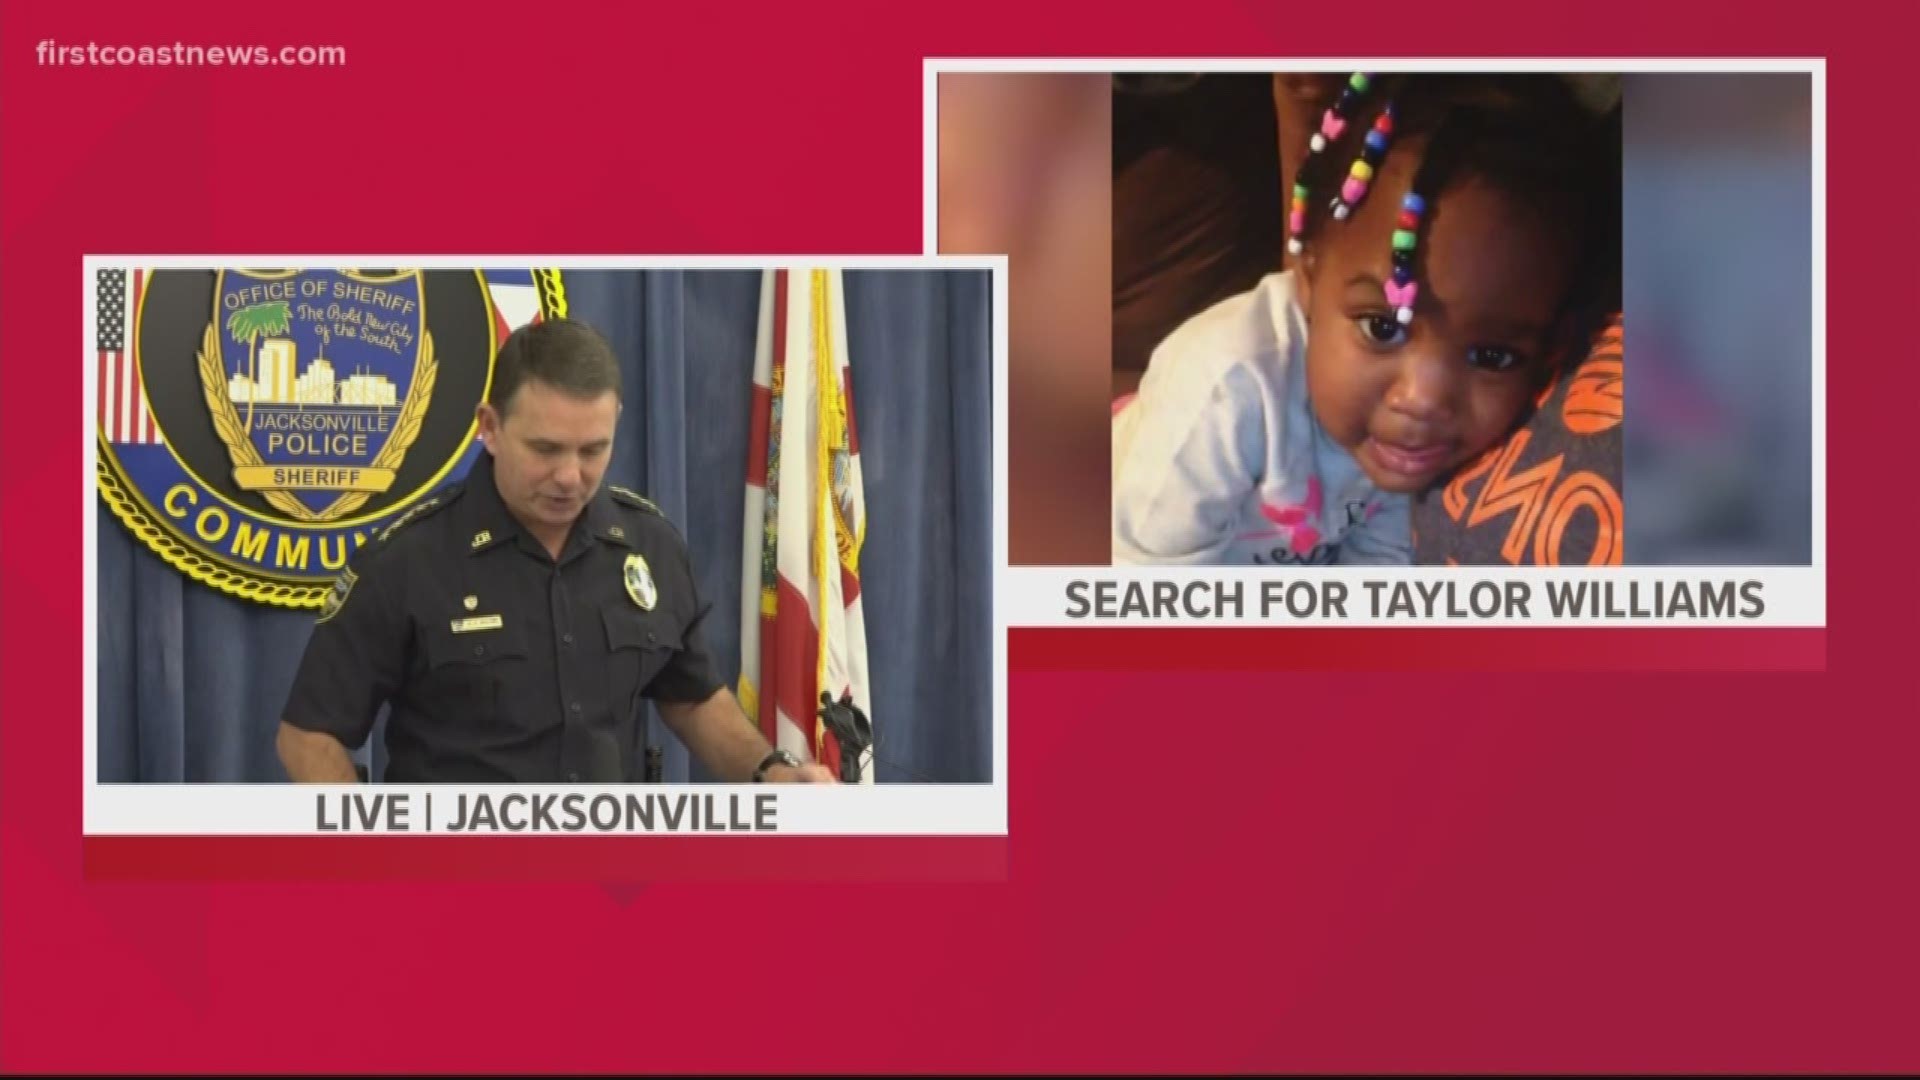 The mother of missing 5-year-old Taylor Williams has been arrested and charged with child neglect and giving false information to law enforcement, police said.